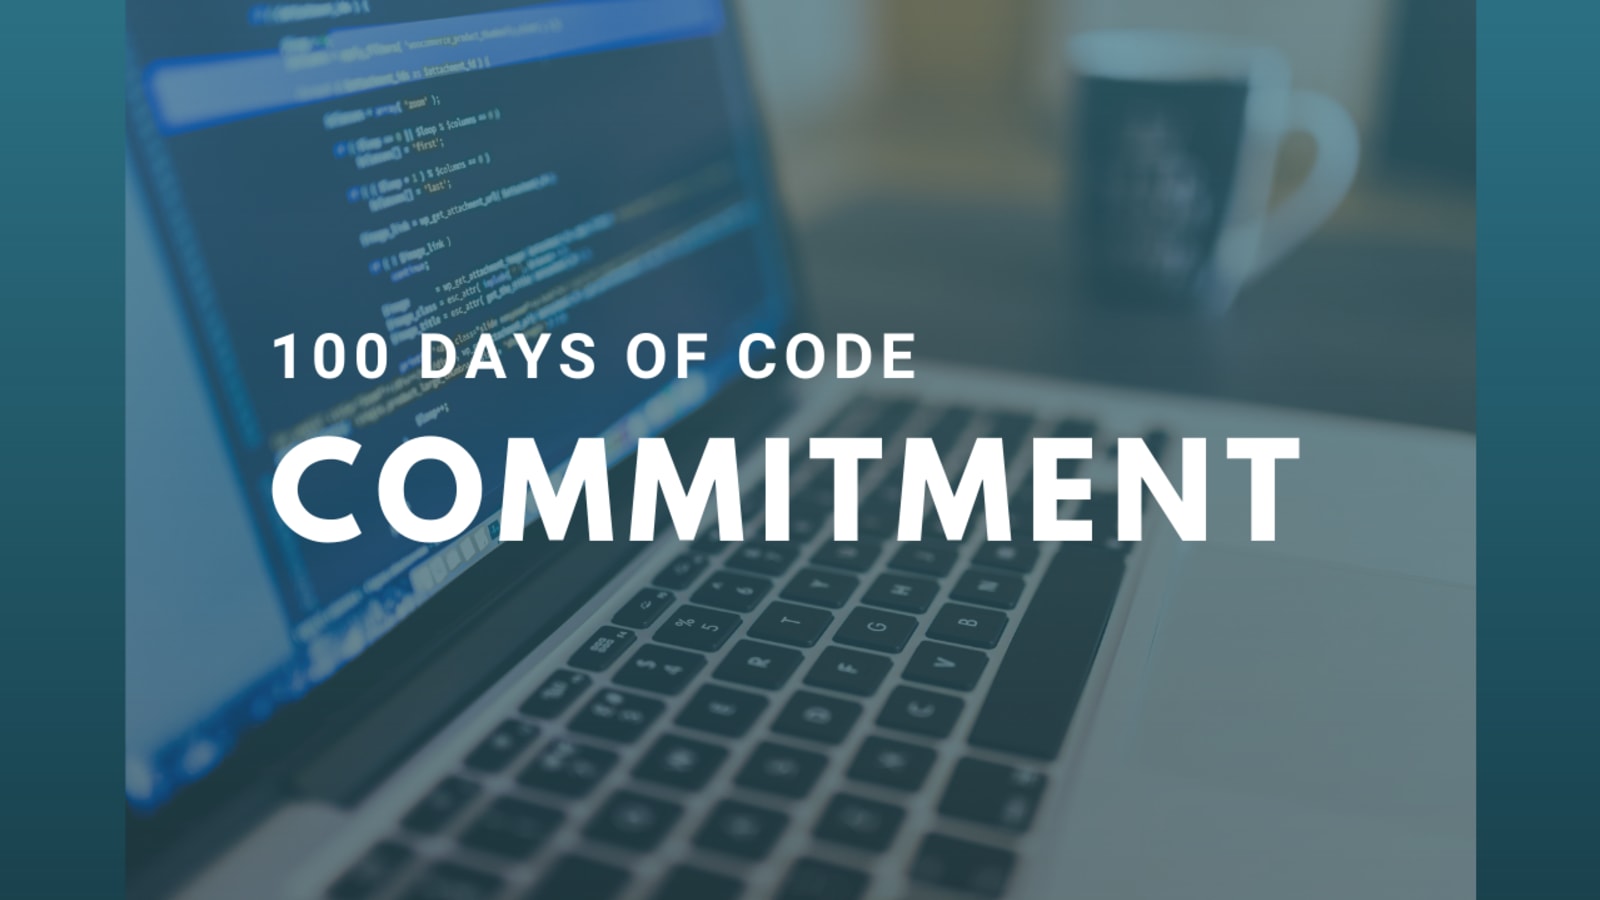 📚 Day 16 of the #100DaysOfCode challenge! 🔍 Learned two pointers